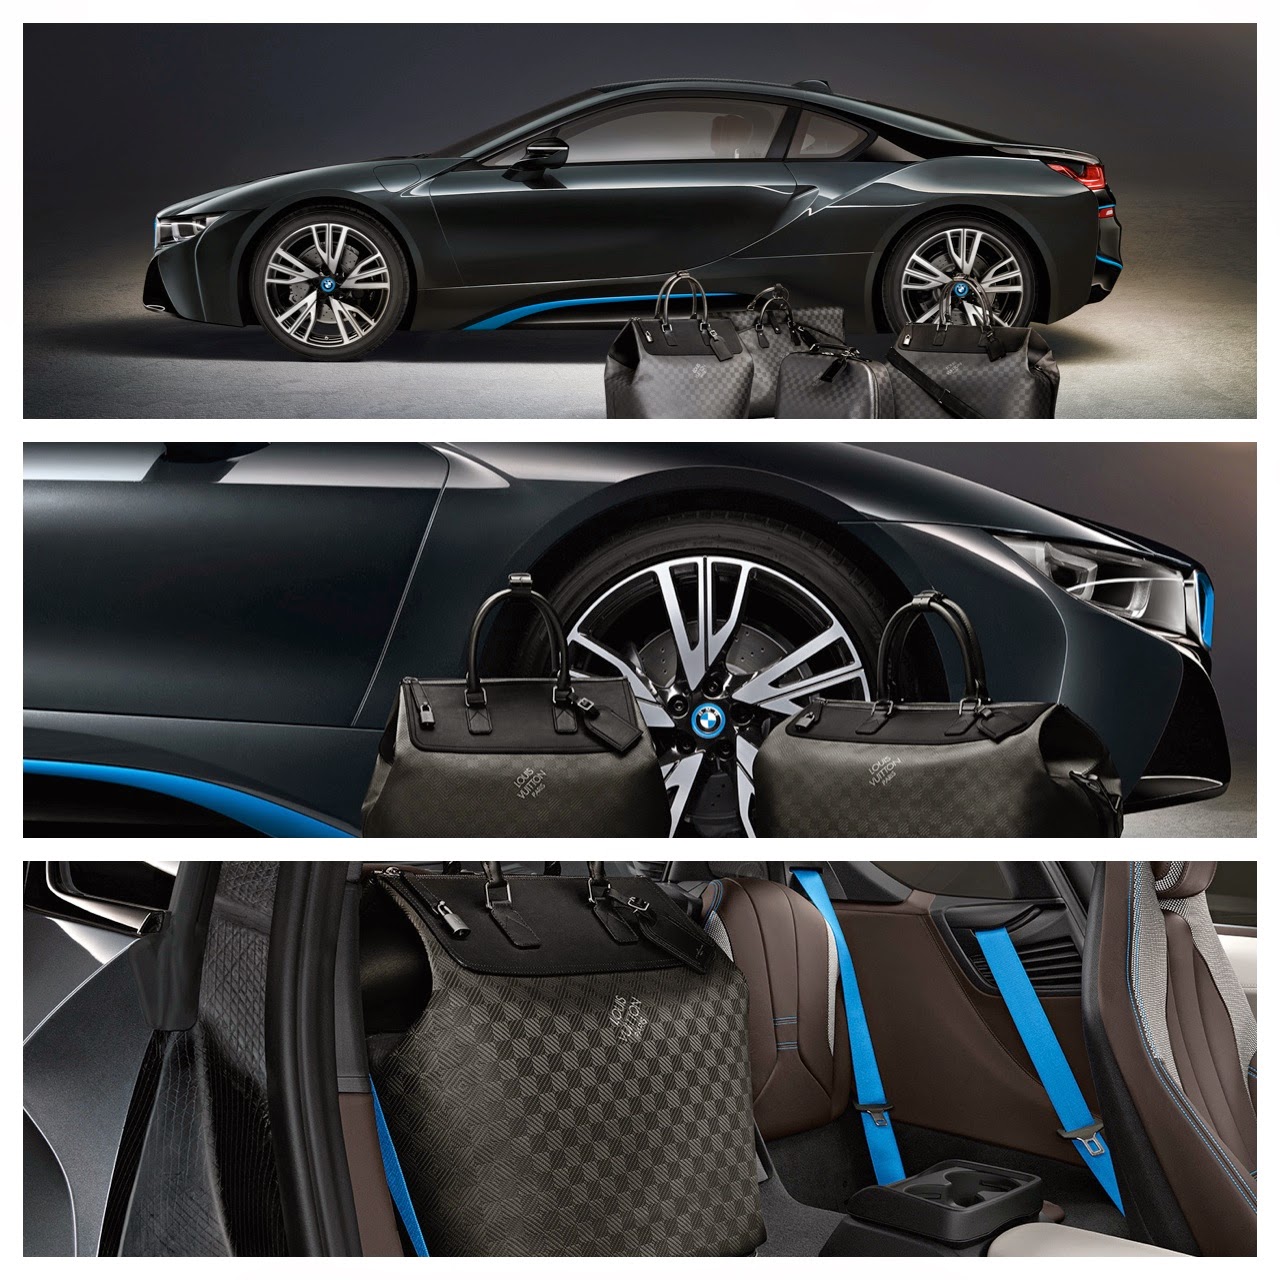 The tailor-made Louis Vuitton luggage set for the BMW i8 made from carbon  fibre: small “Weekender PM i8“, big “Weekender GM i8“, hardshell “Business  Case i8“,”Garment Bag i8“. (08/2014)